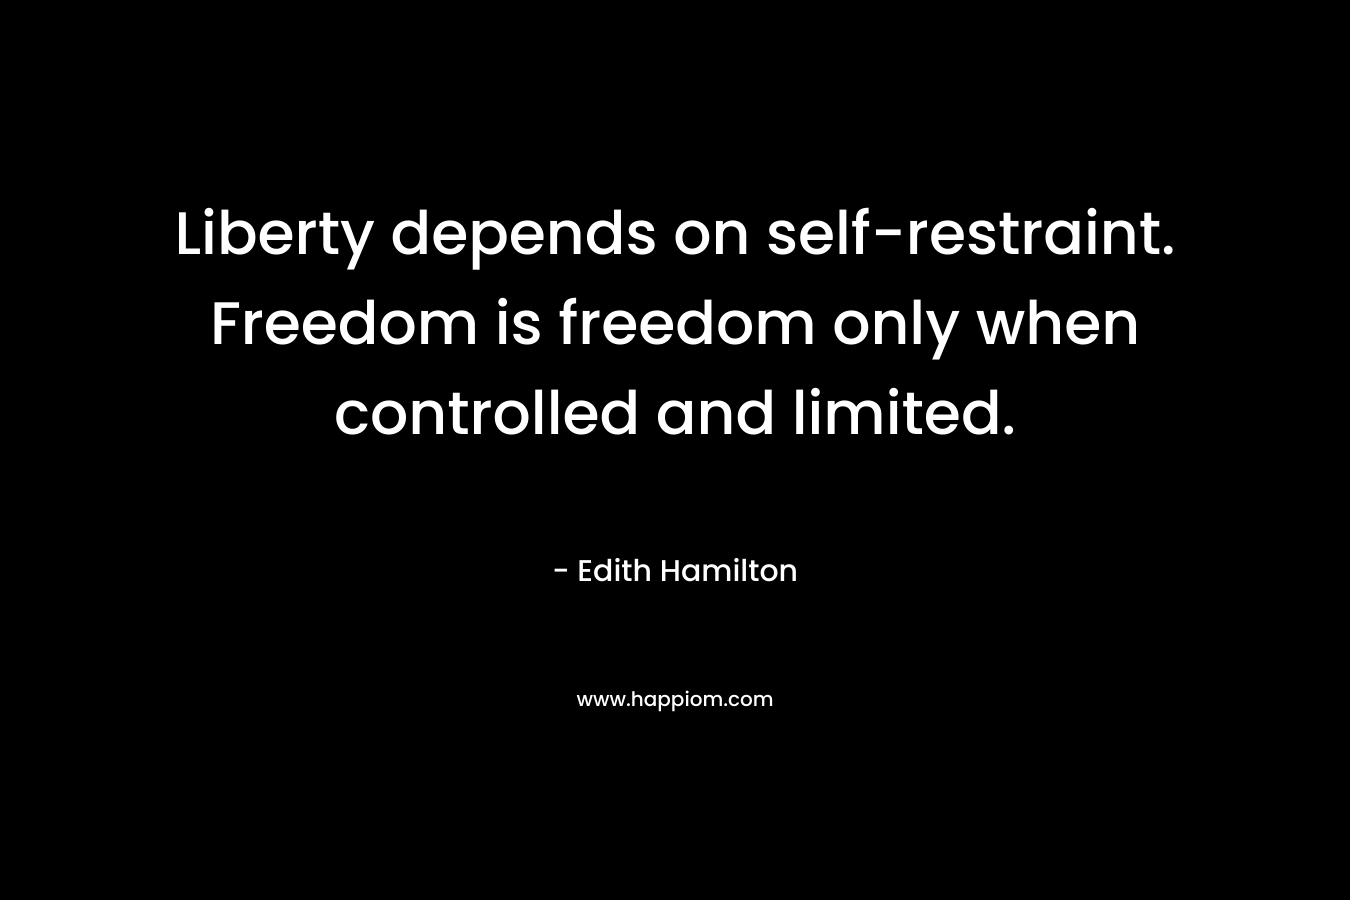 Liberty depends on self-restraint. Freedom is freedom only when controlled and limited. – Edith Hamilton